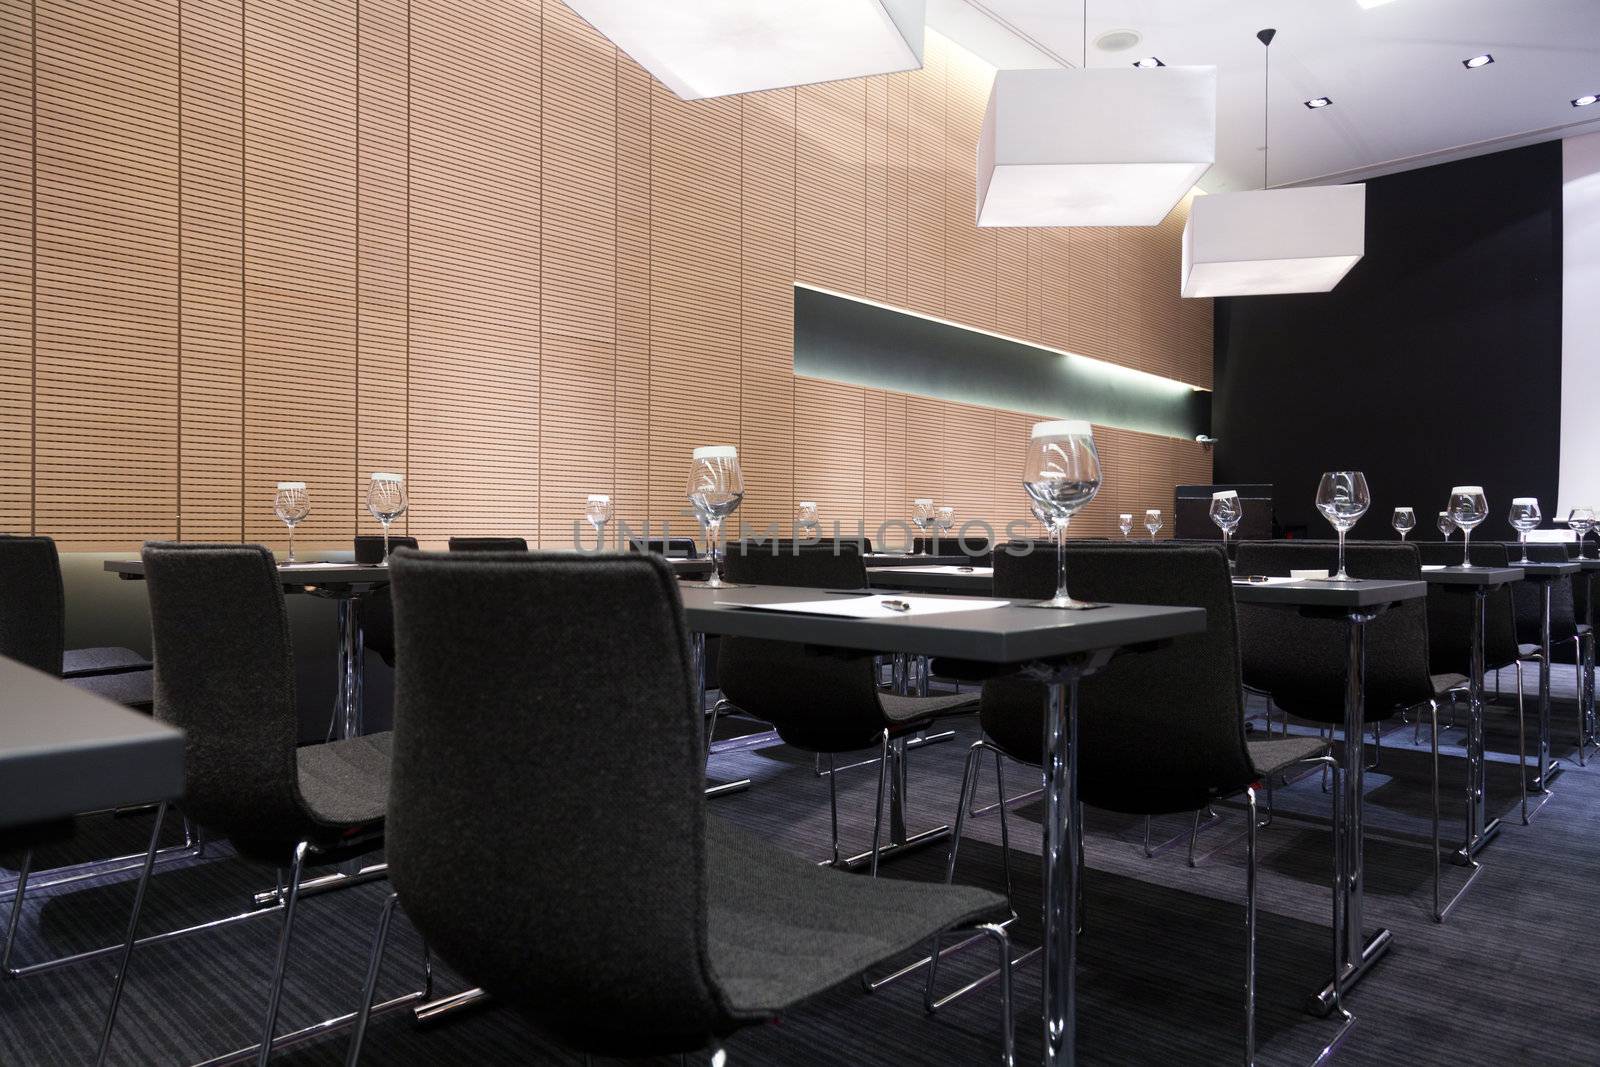 Meeting room interior with table, raw of chairs and block-notes,decorat ed in black and white tones